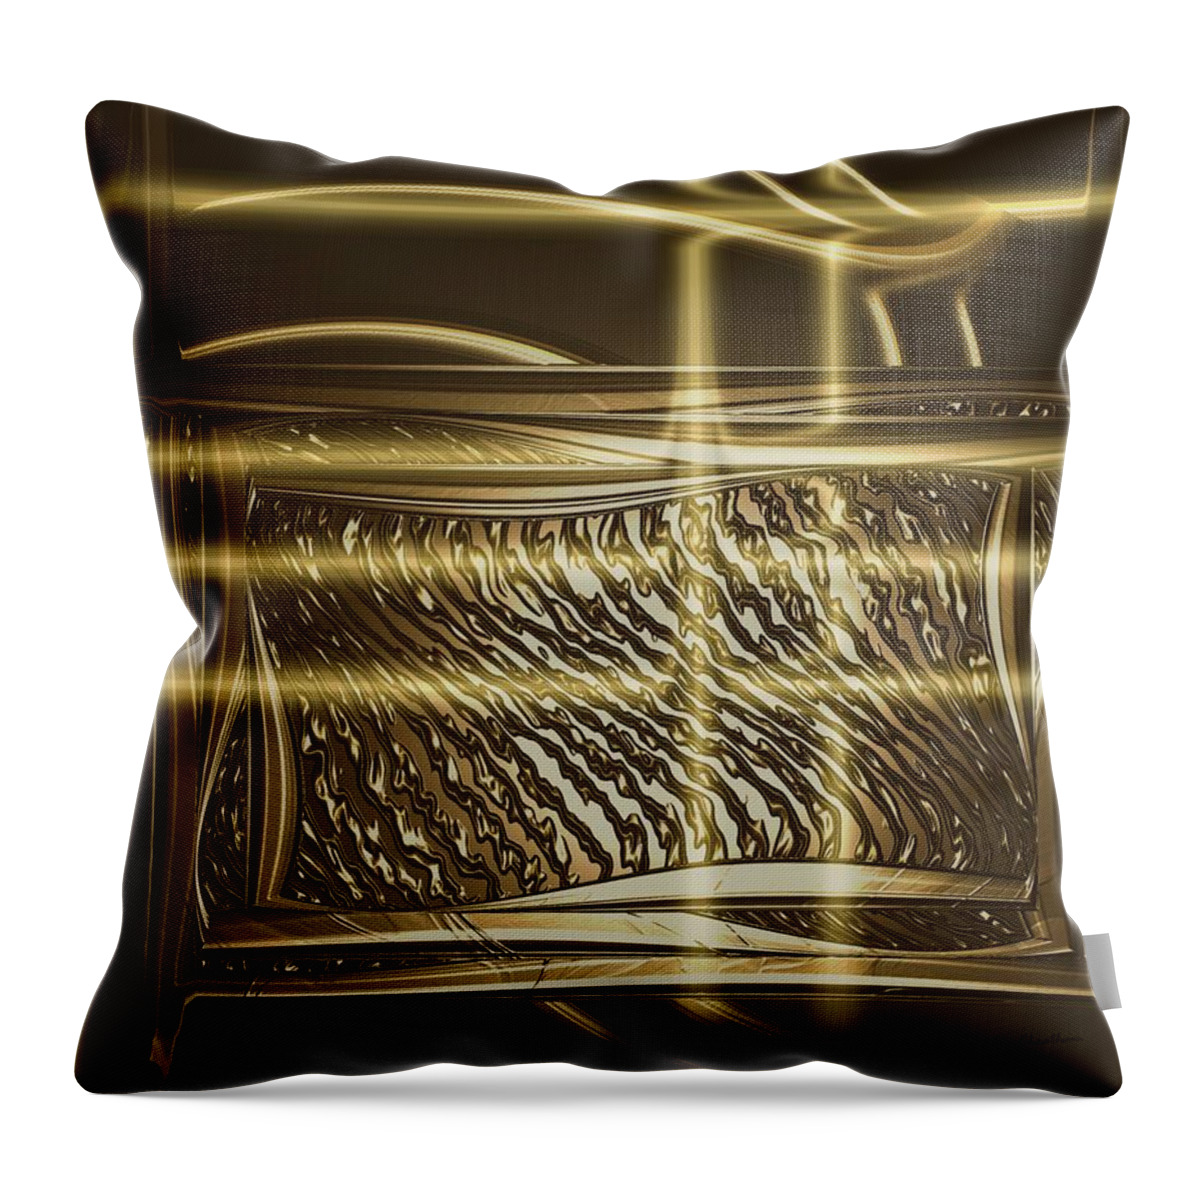 Brown And Gold Throw Pillow featuring the digital art Gold Chrome Abstract by Kae Cheatham